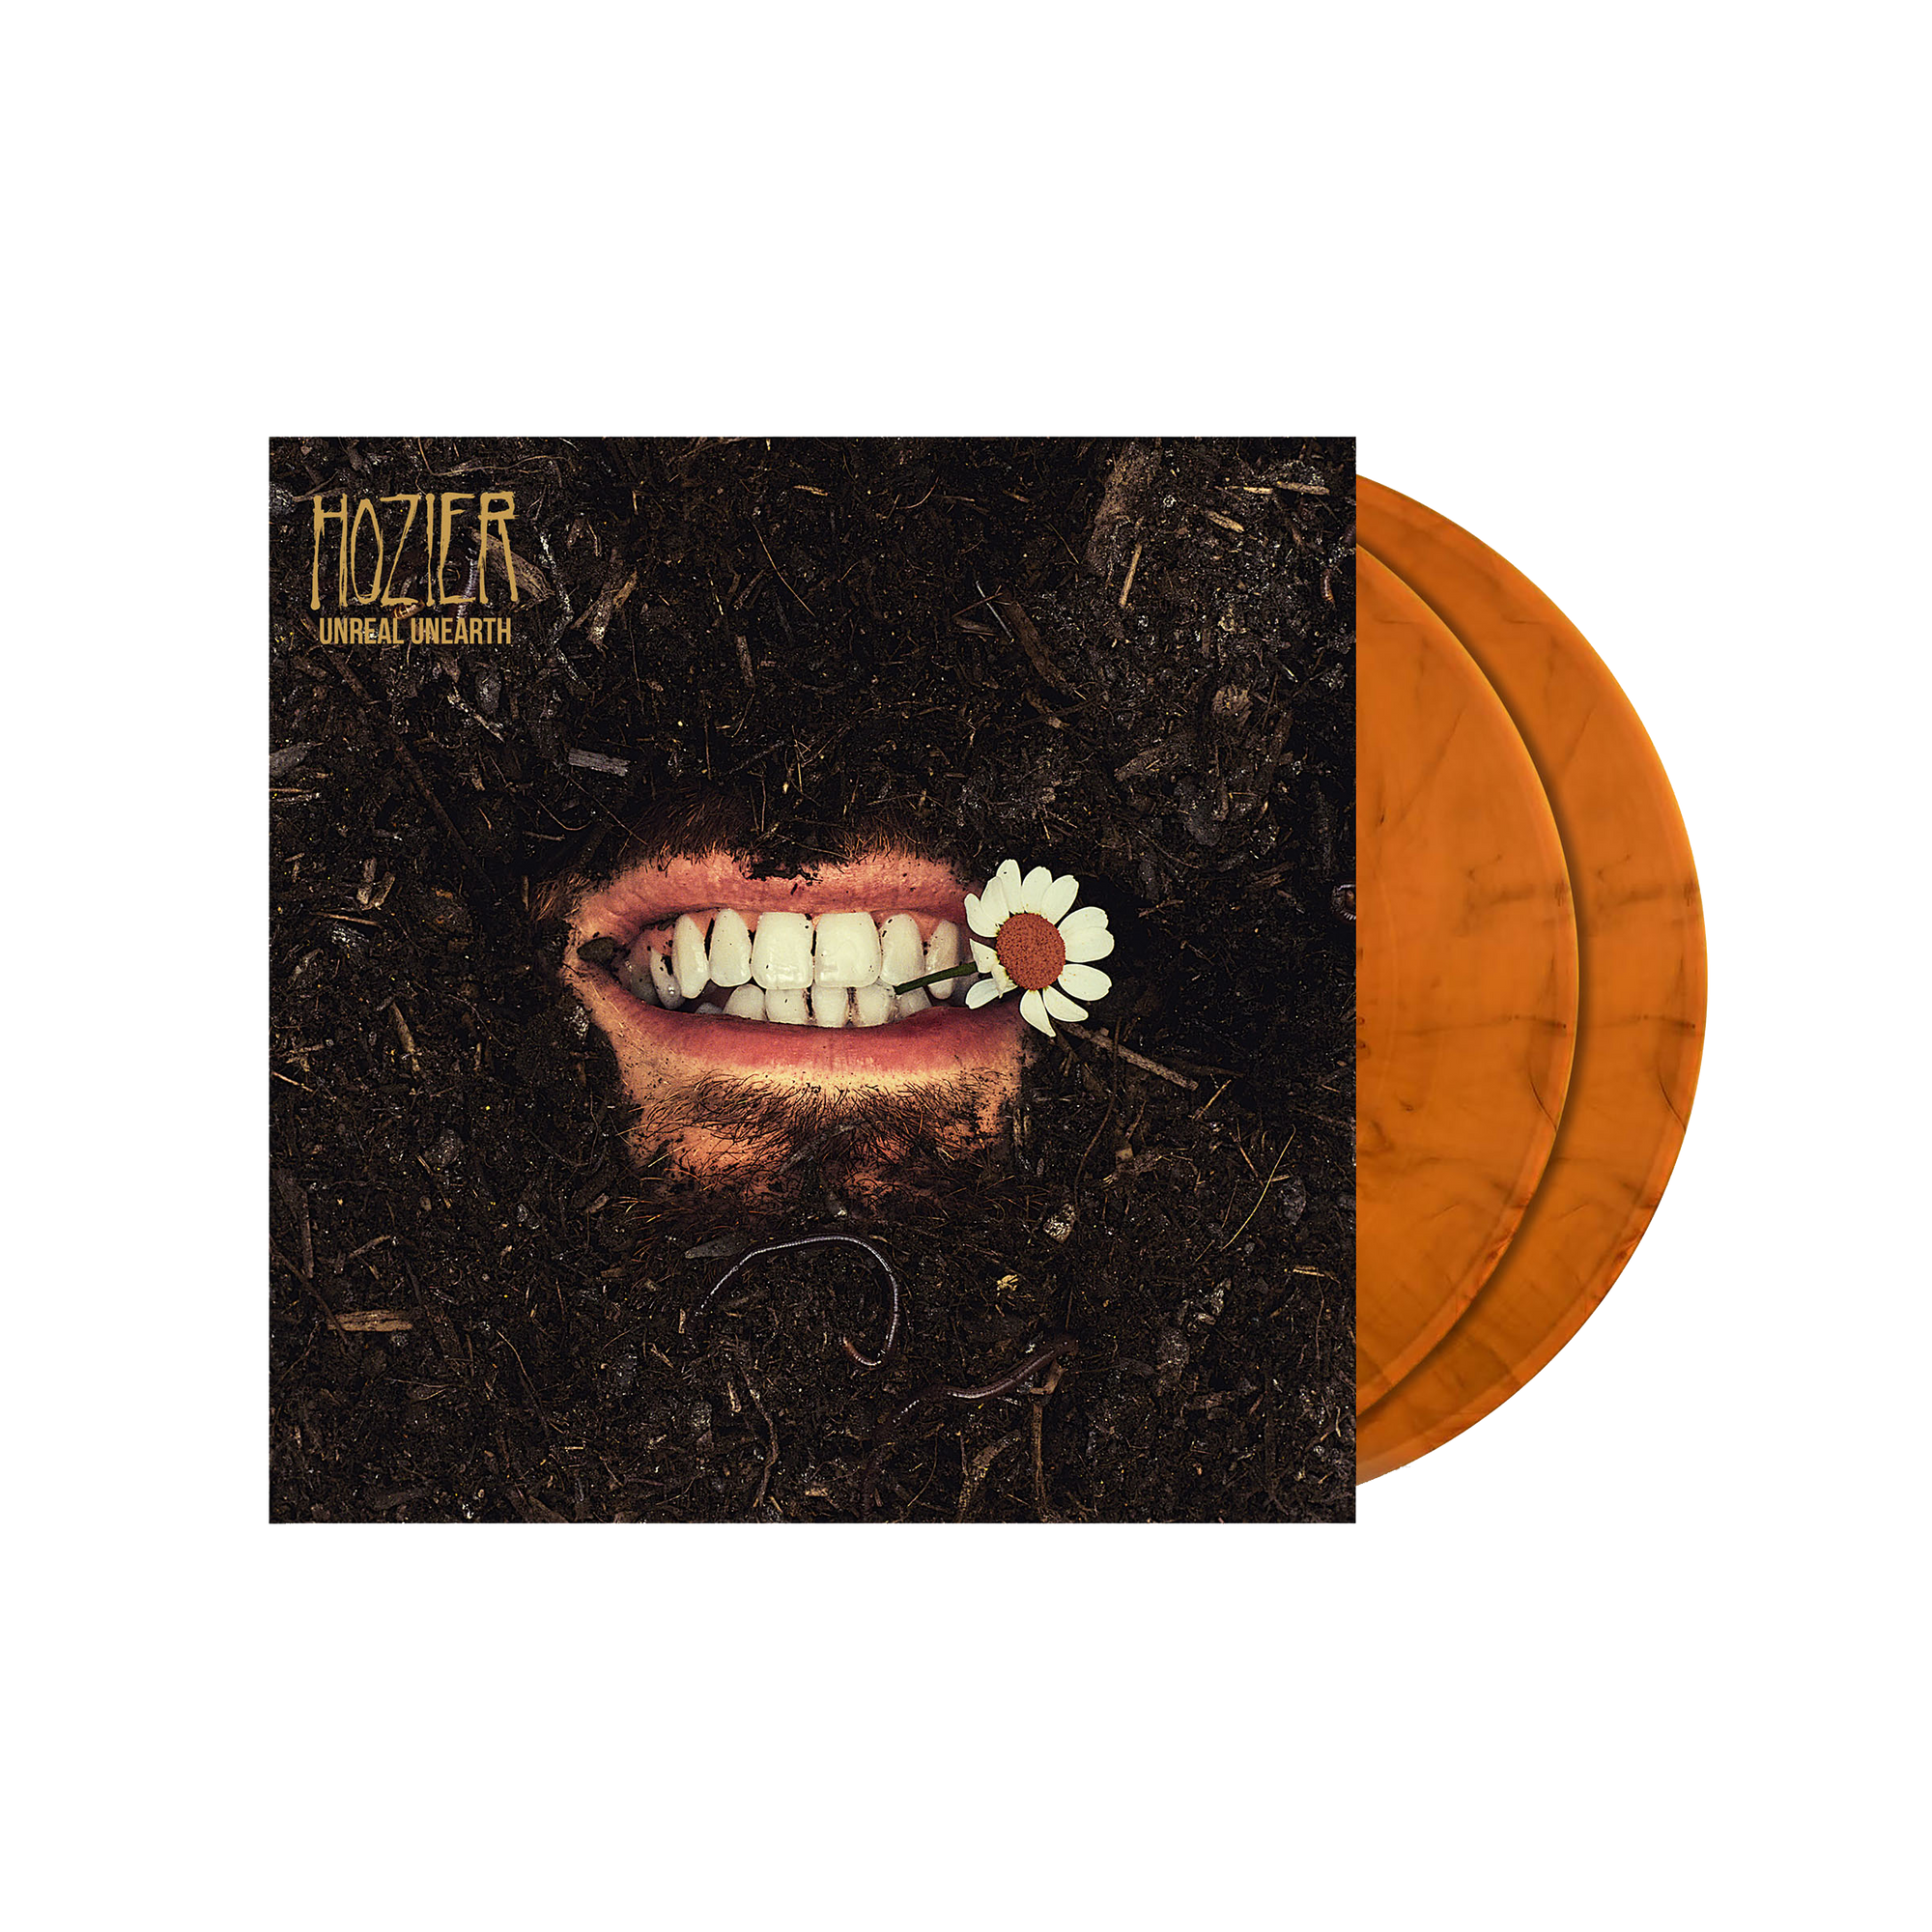 Unreal Unearth Exclusive Limited Edition Raw Ochre Vinyl LP